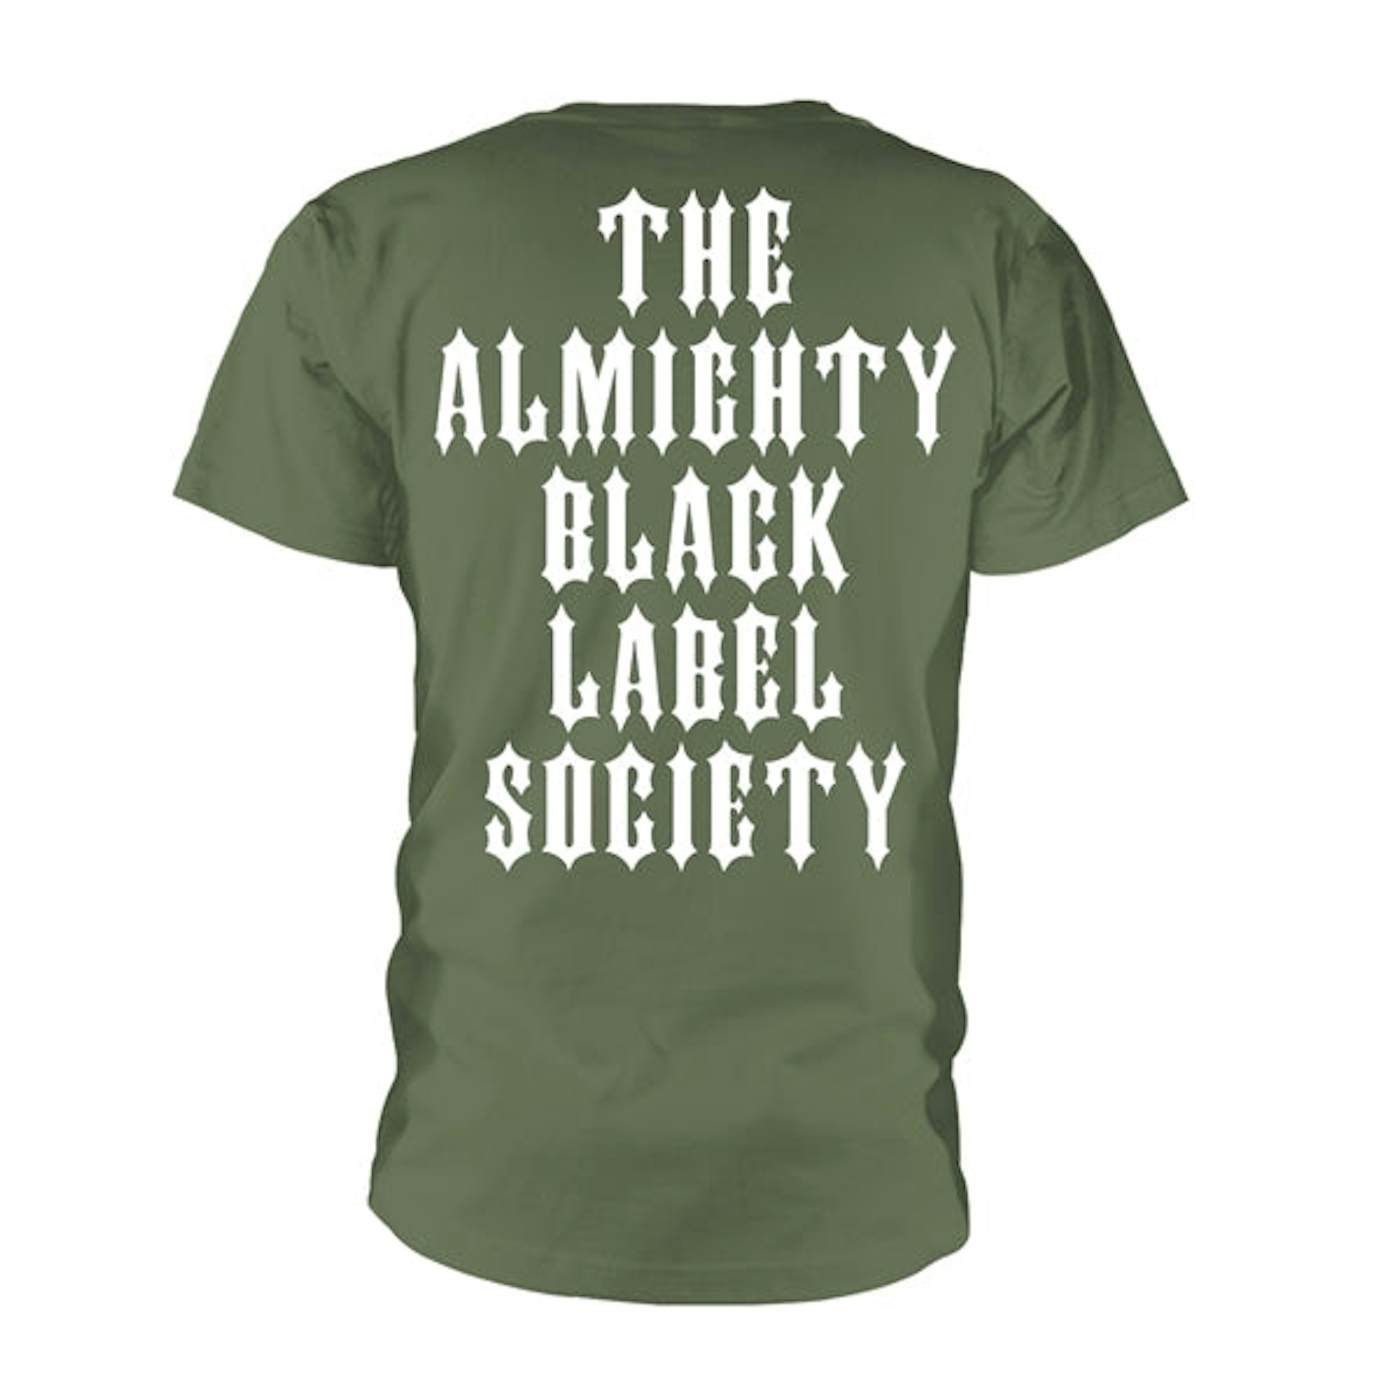 Black Label Society T-Shirt - The Almighty (Olive)